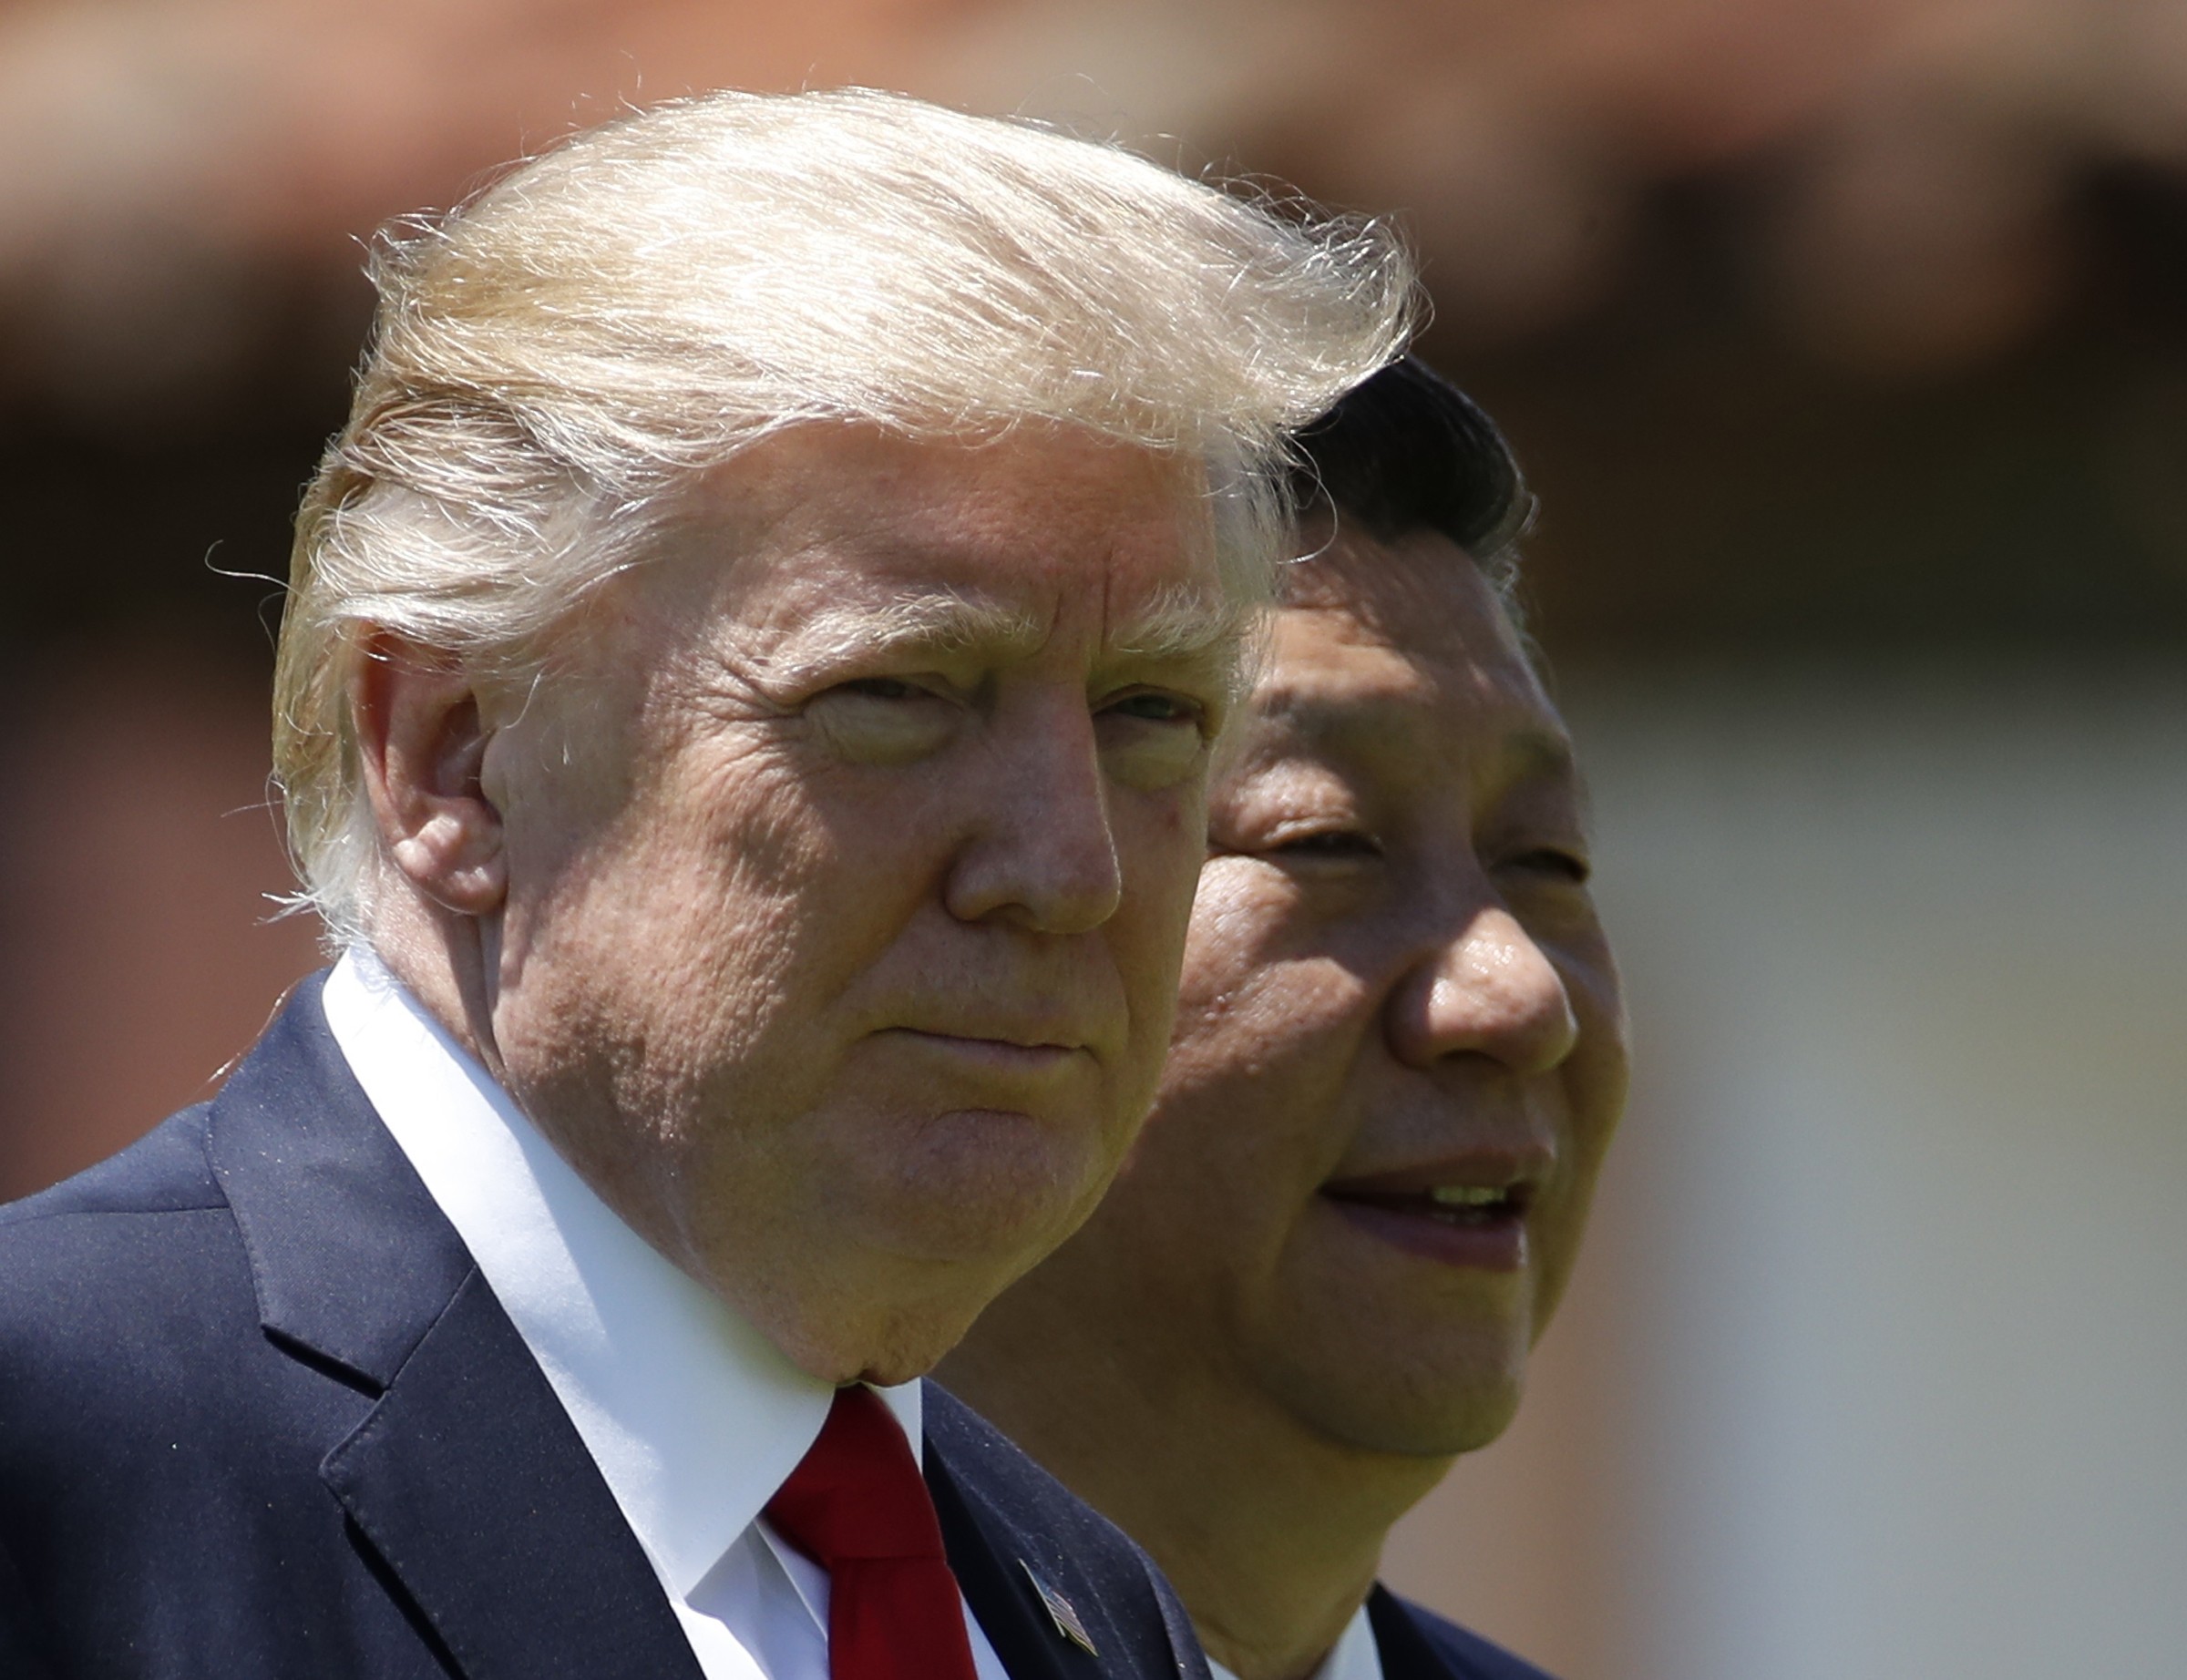 Chinese President Xi Jinping and US President Donald Trump are expected to come together for a summit in March or April, potentially to seal a trade deal. Both men are seen together in Palm Beach, Florida, in April 2017. Photo: AP